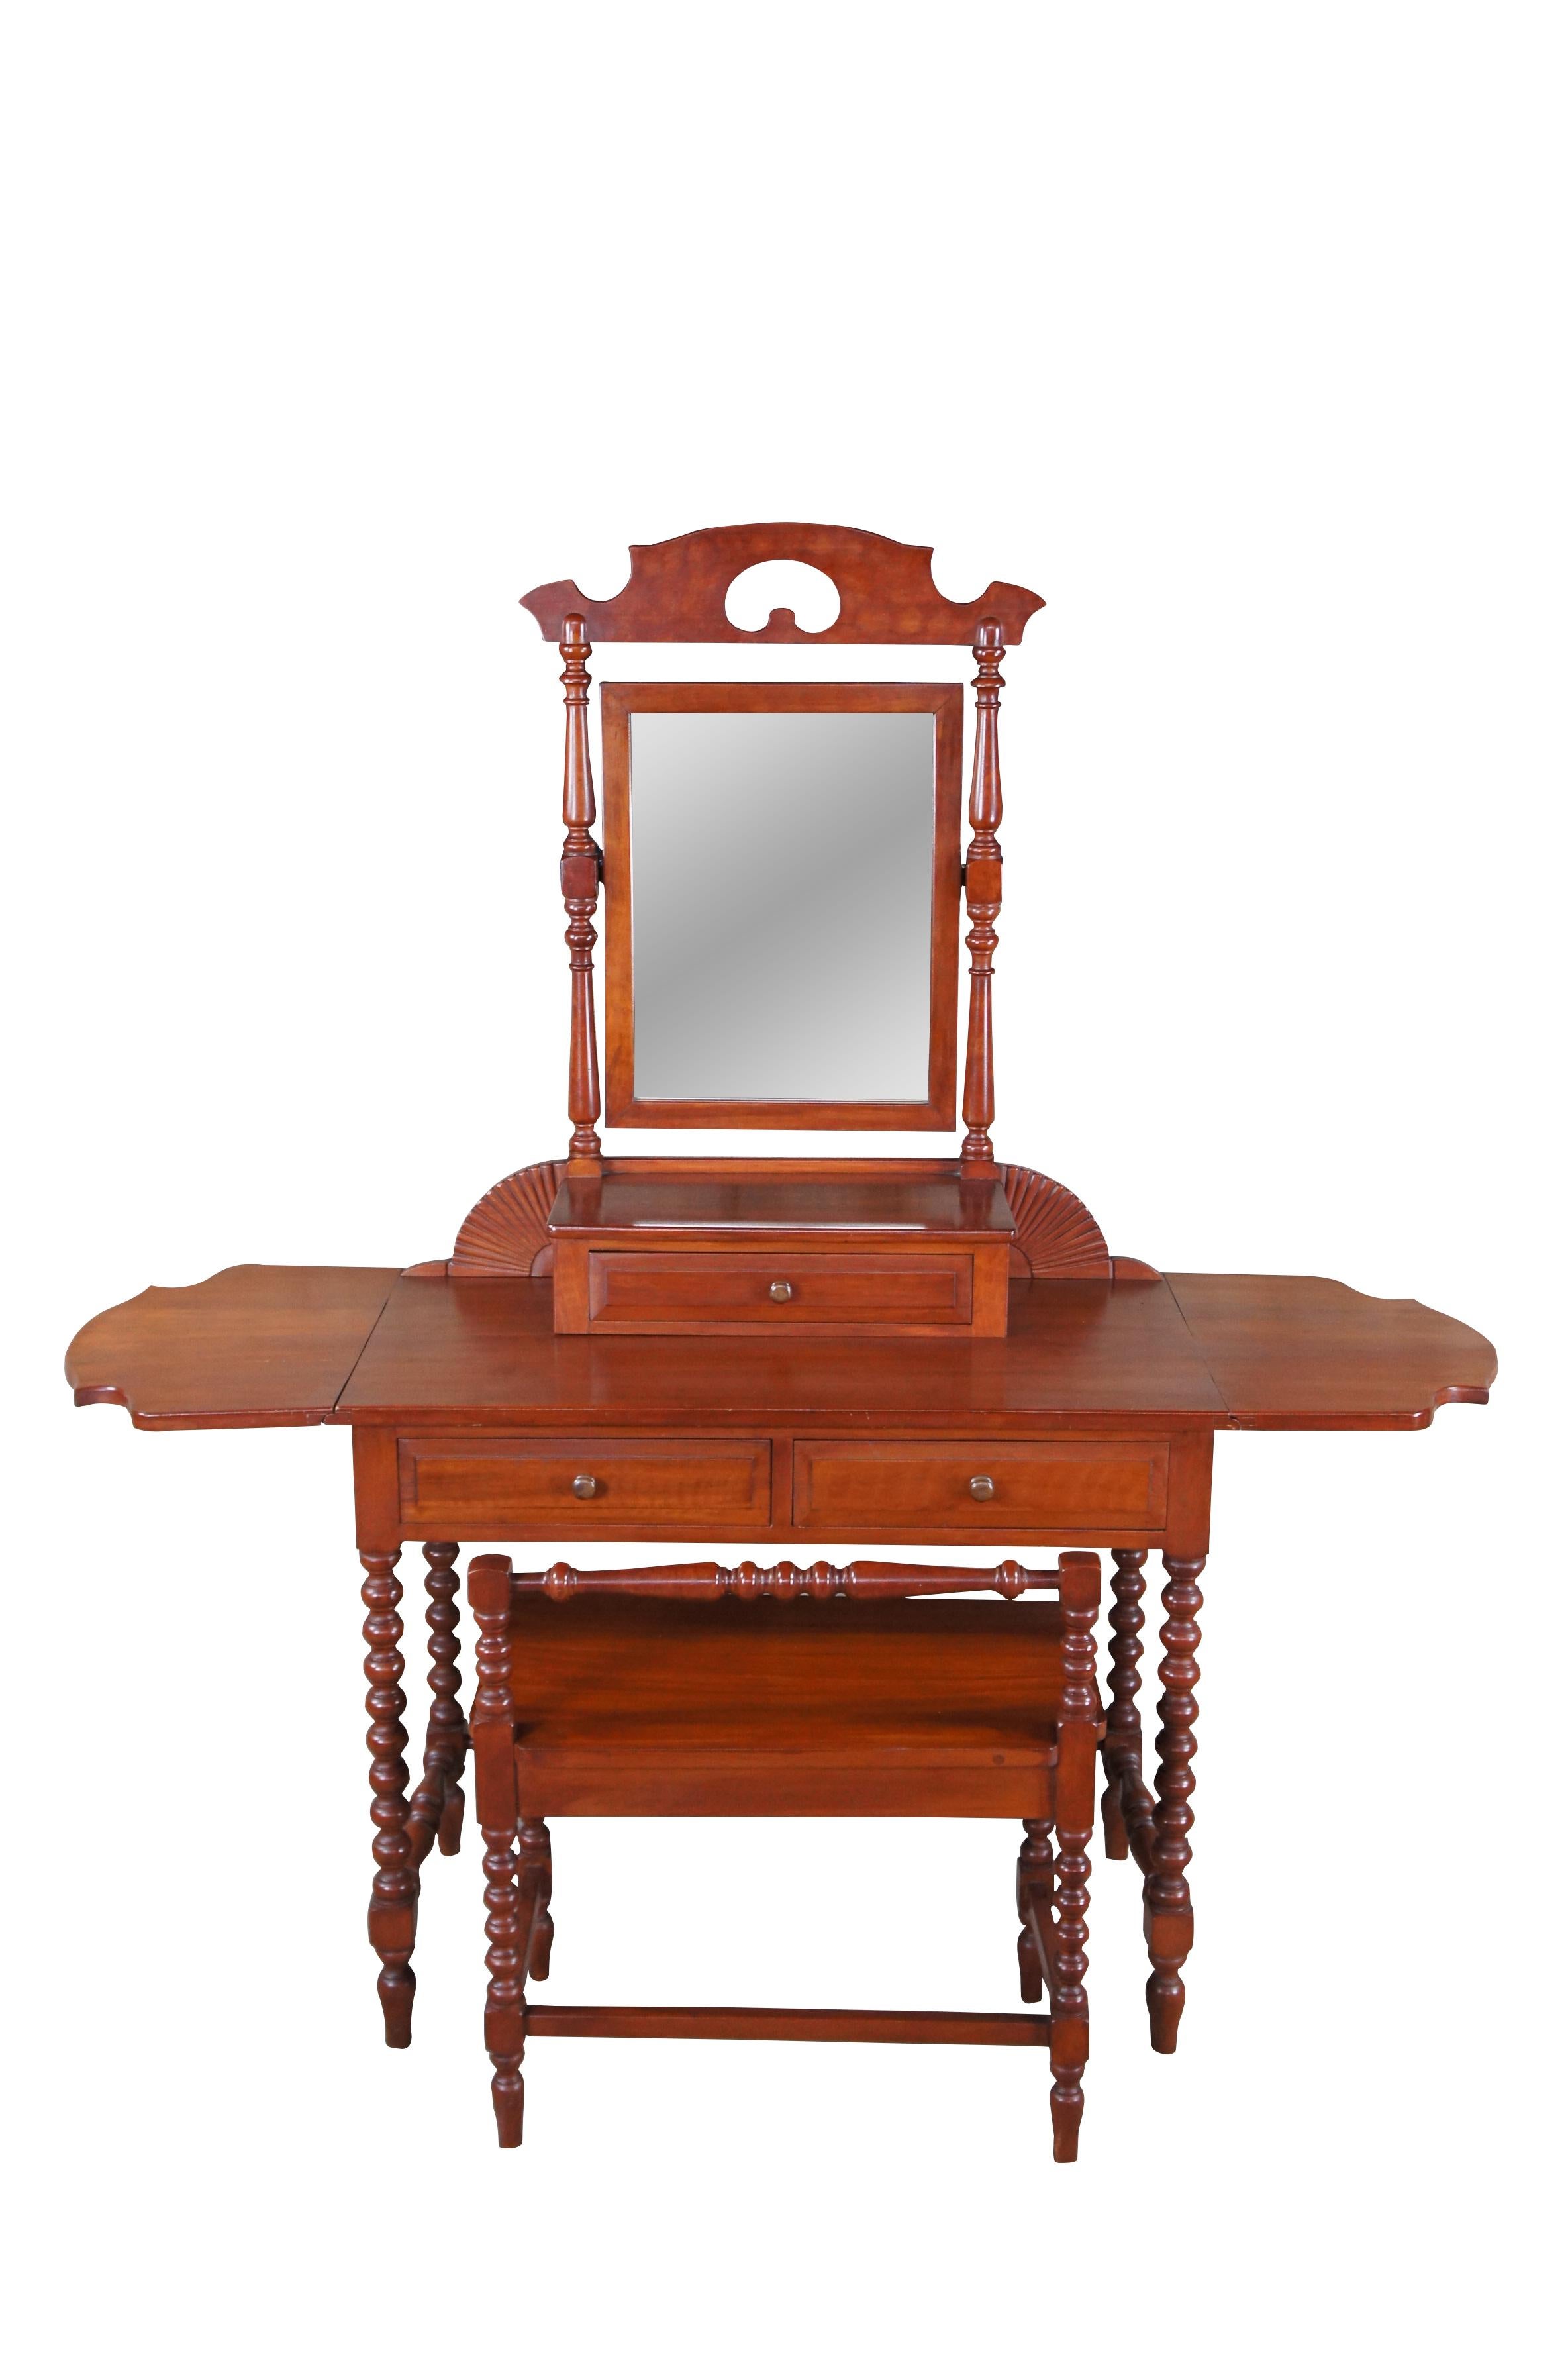 Antique early American dressing table vanity and bench. Made of cherry featuring unique form with serpentine drop leaves, adjustable mirror, multiple drawers and carved, ribbed and turned accents

Made by William P Hund of Perrysburg Ohio in 1932,